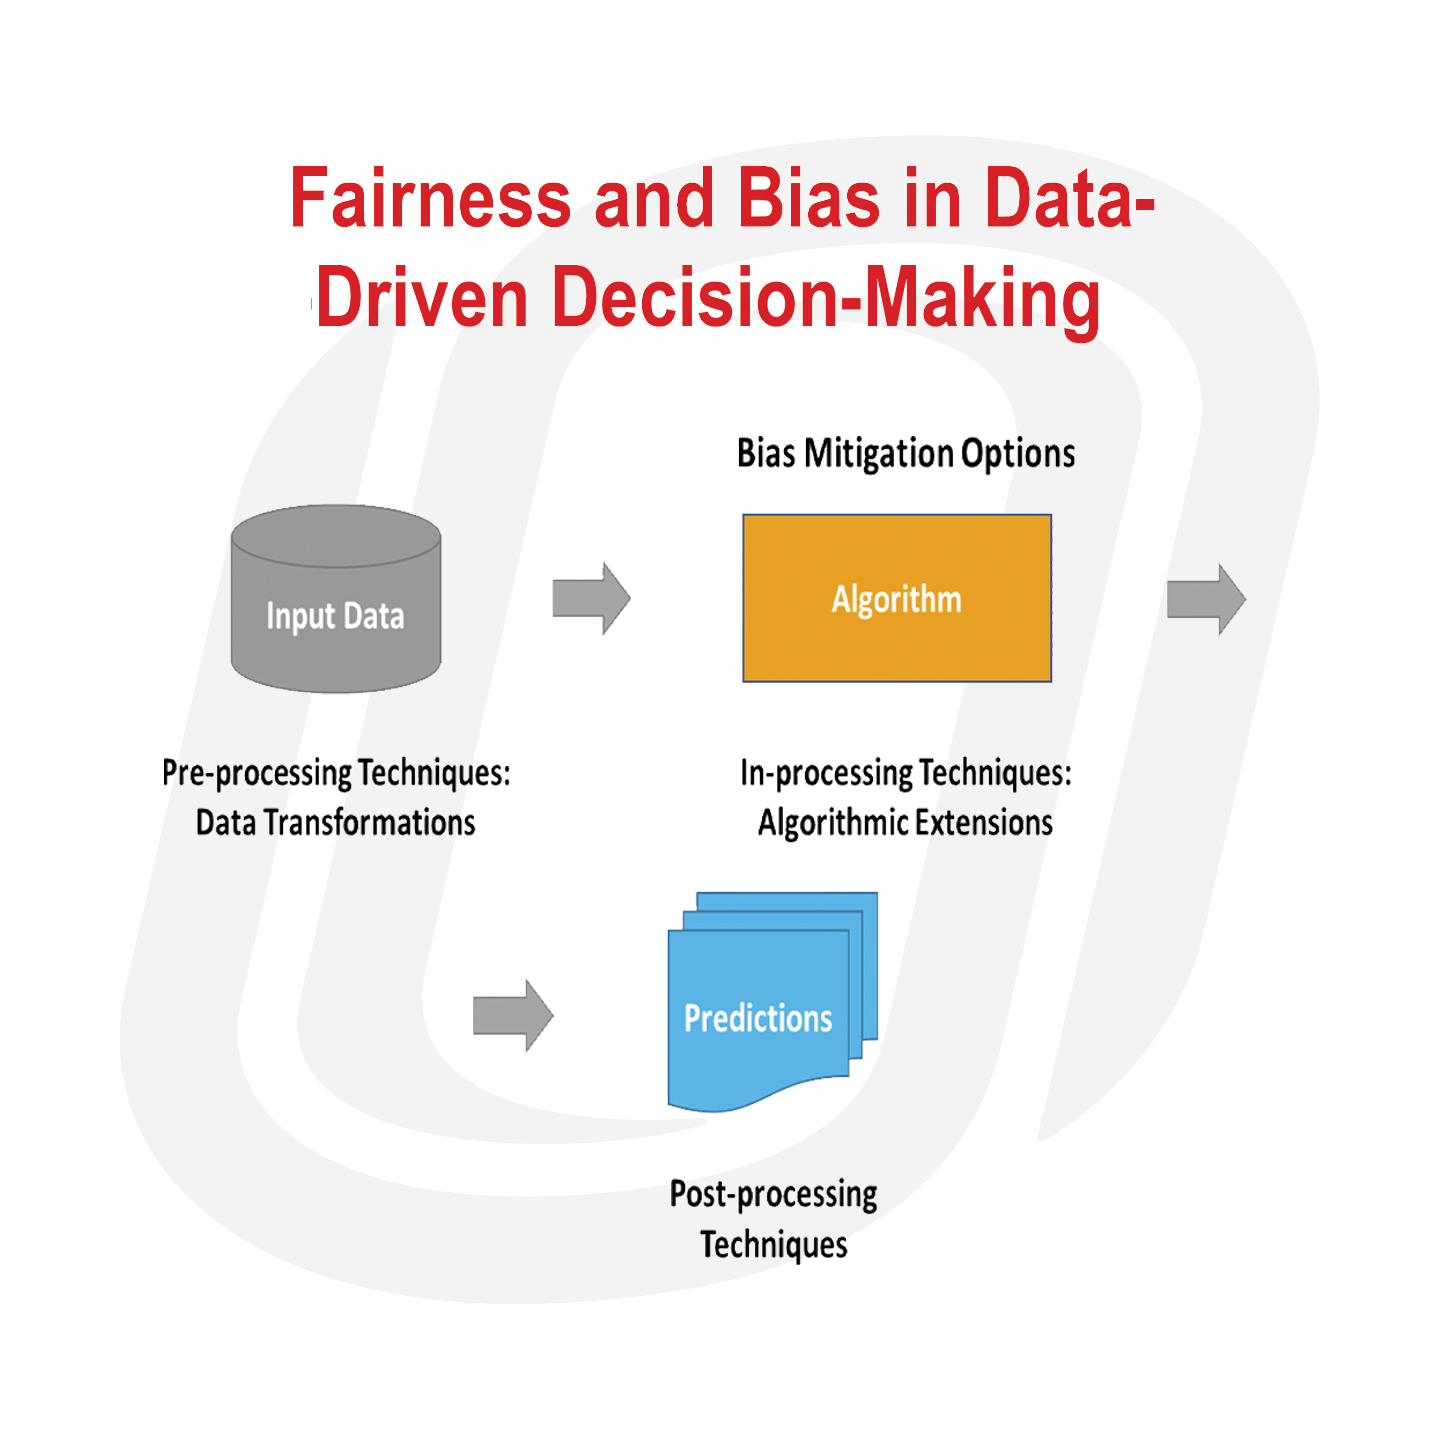 a diagram that depicts a three-step process for bias migration options, highlighting the fairness and bias in data-driven decision making